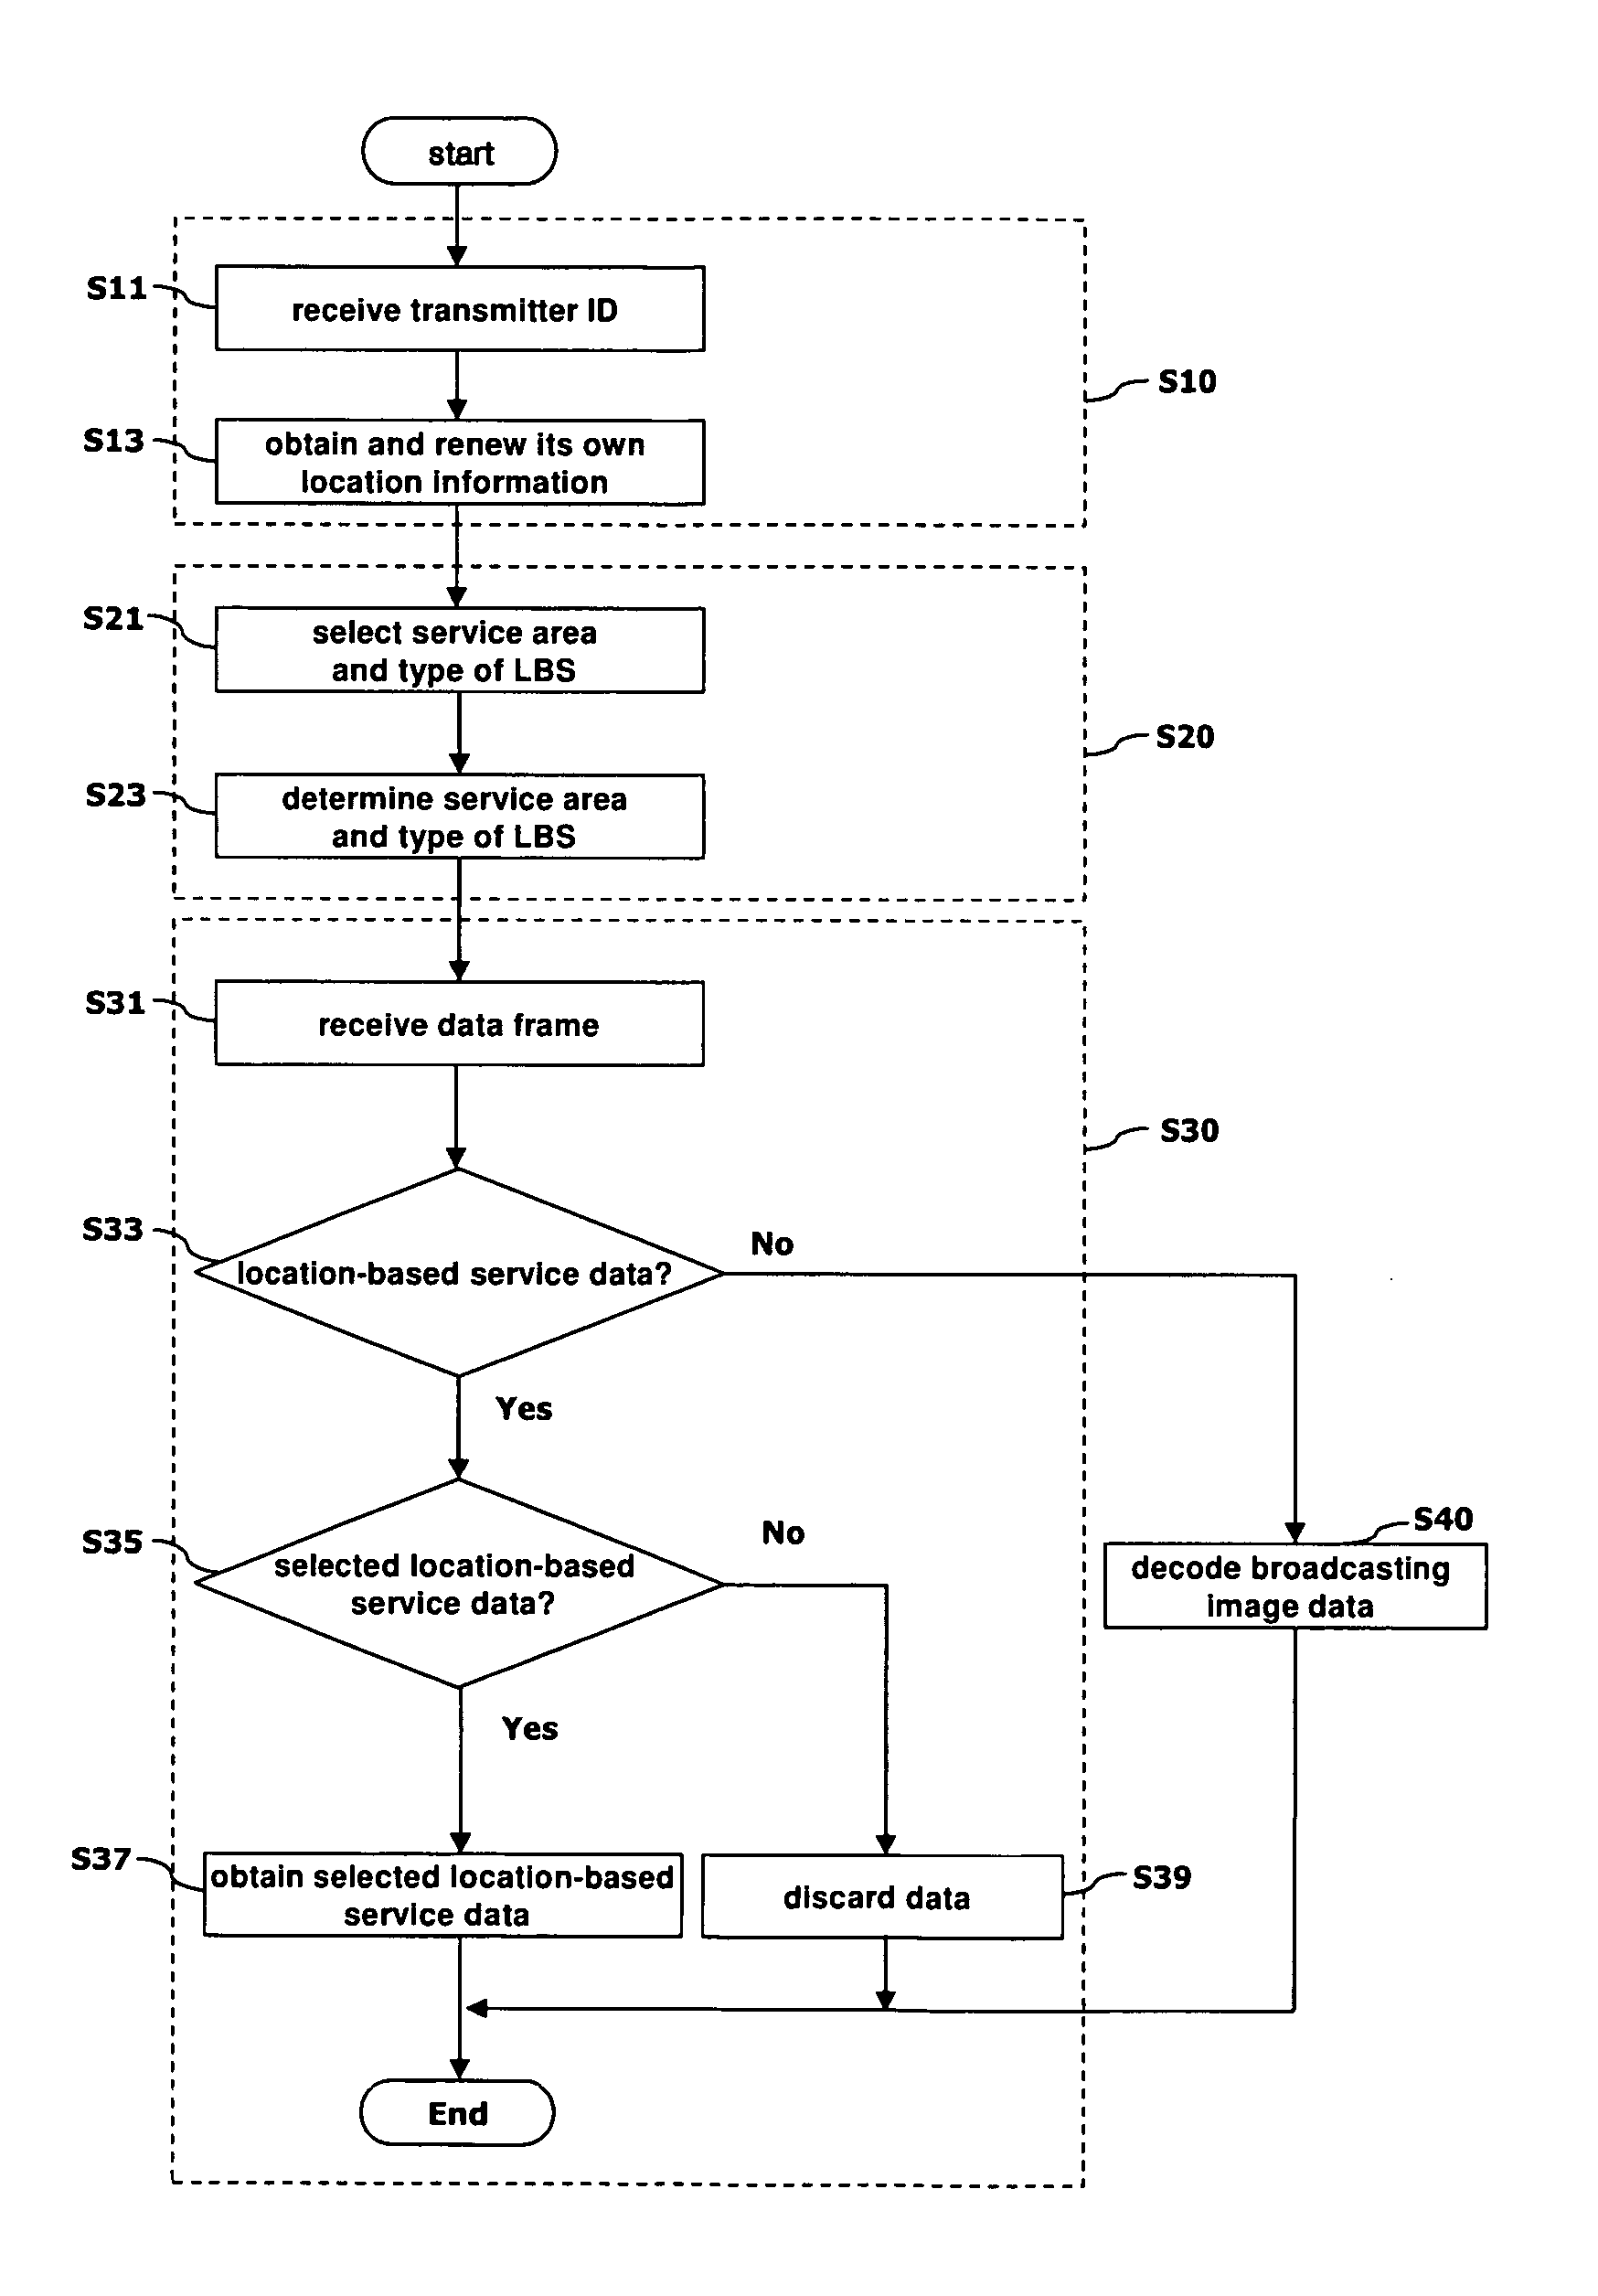 Location based service for point-to-multipoint broadcasting